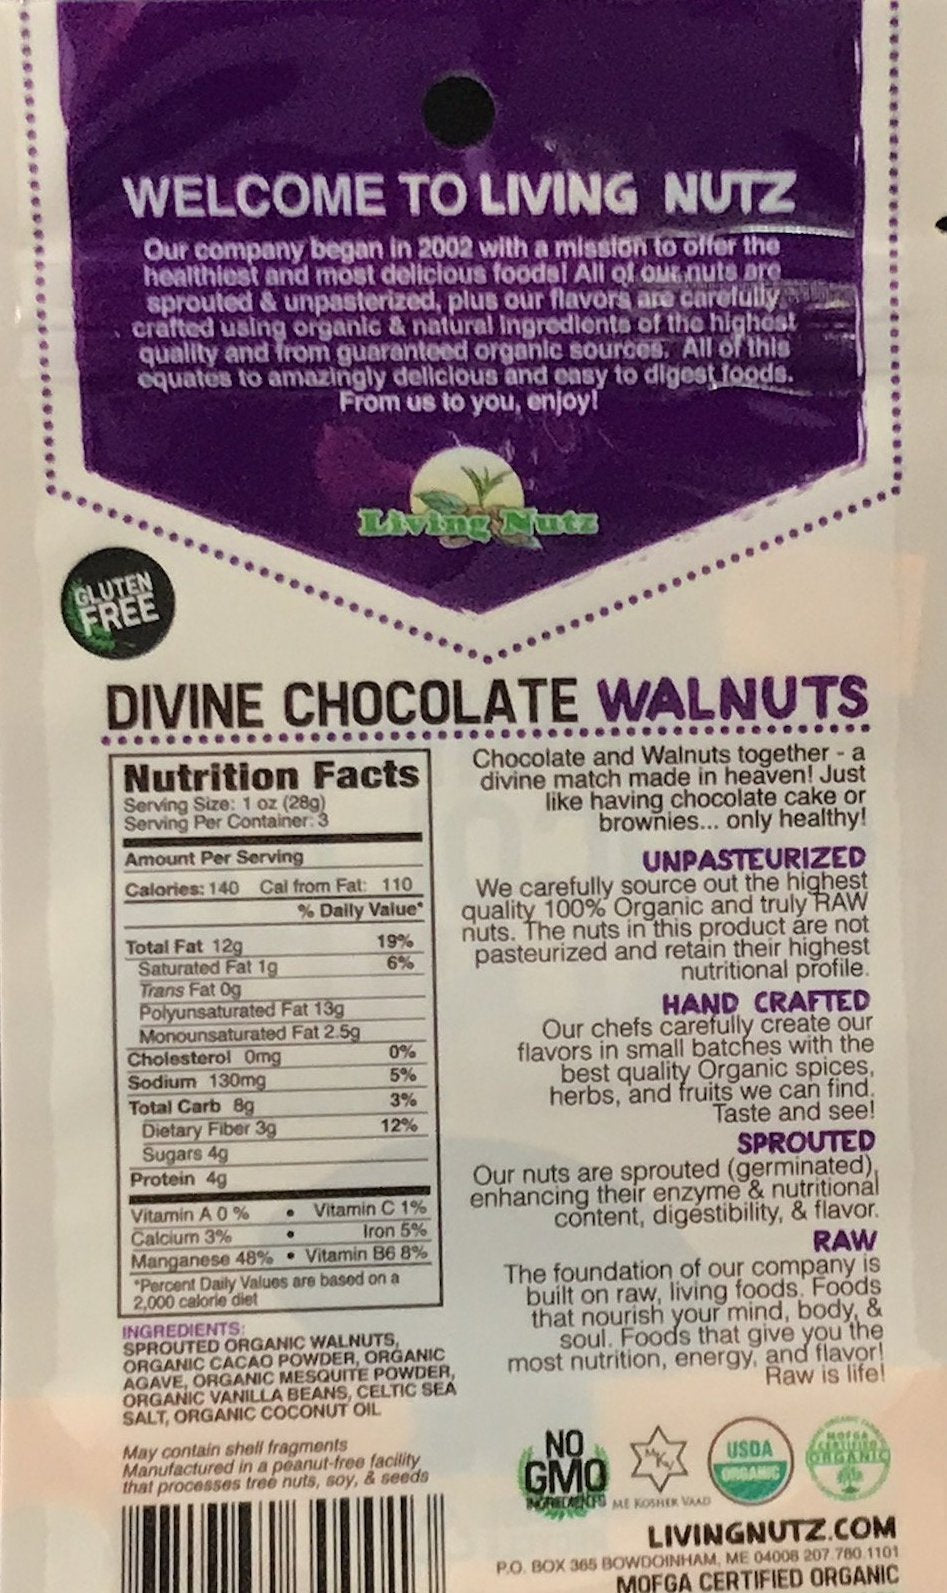 Sprouted walnuts. Chocolate flavor organic walnuts. Sprouted nuts.